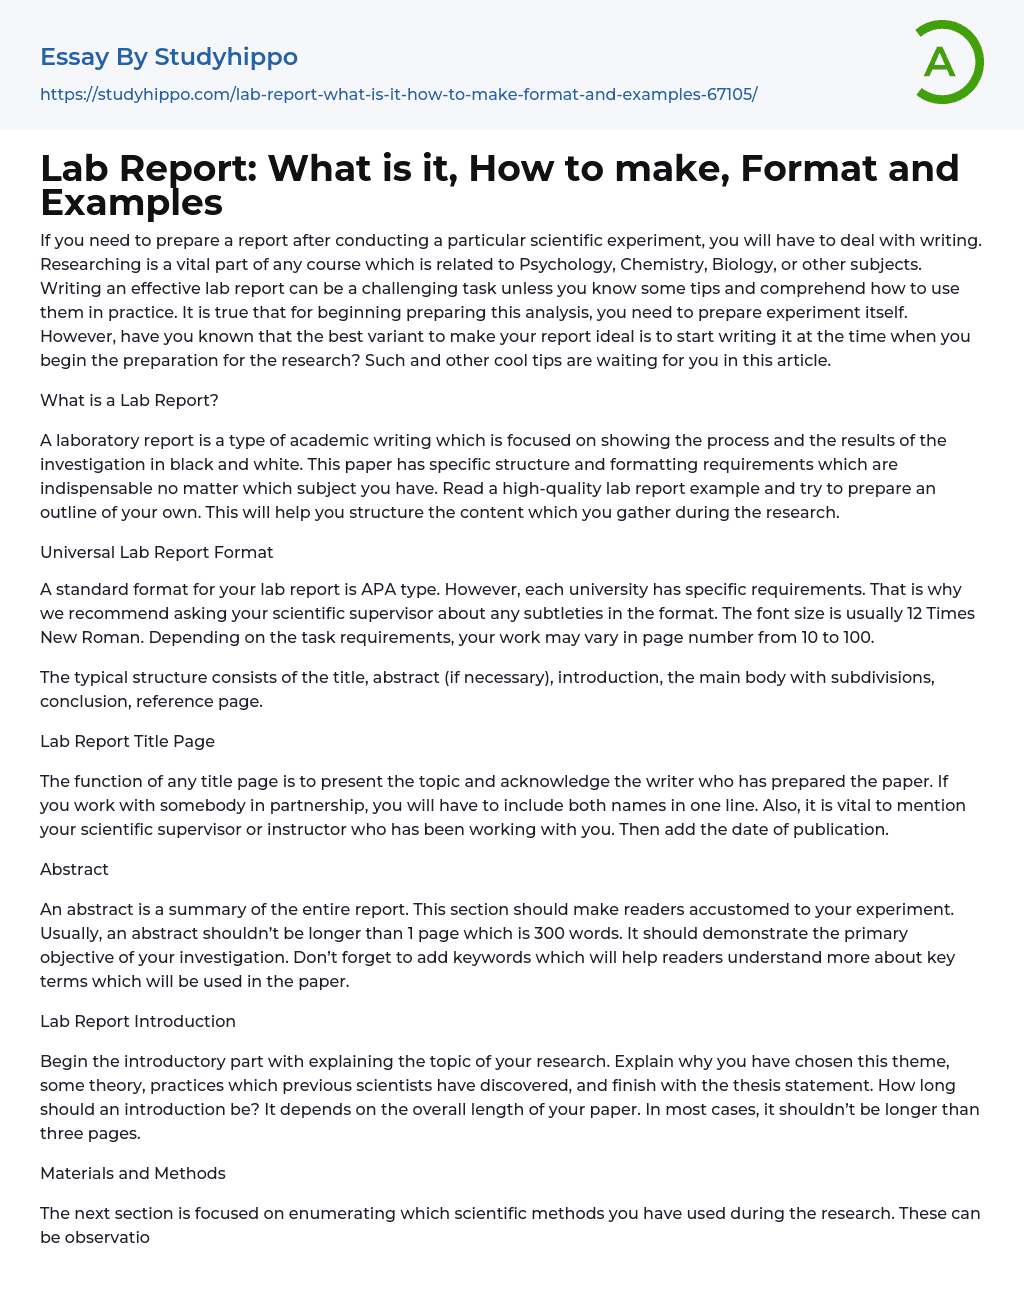 Lab Report: What is it, How to make, Format and Examples Essay Example